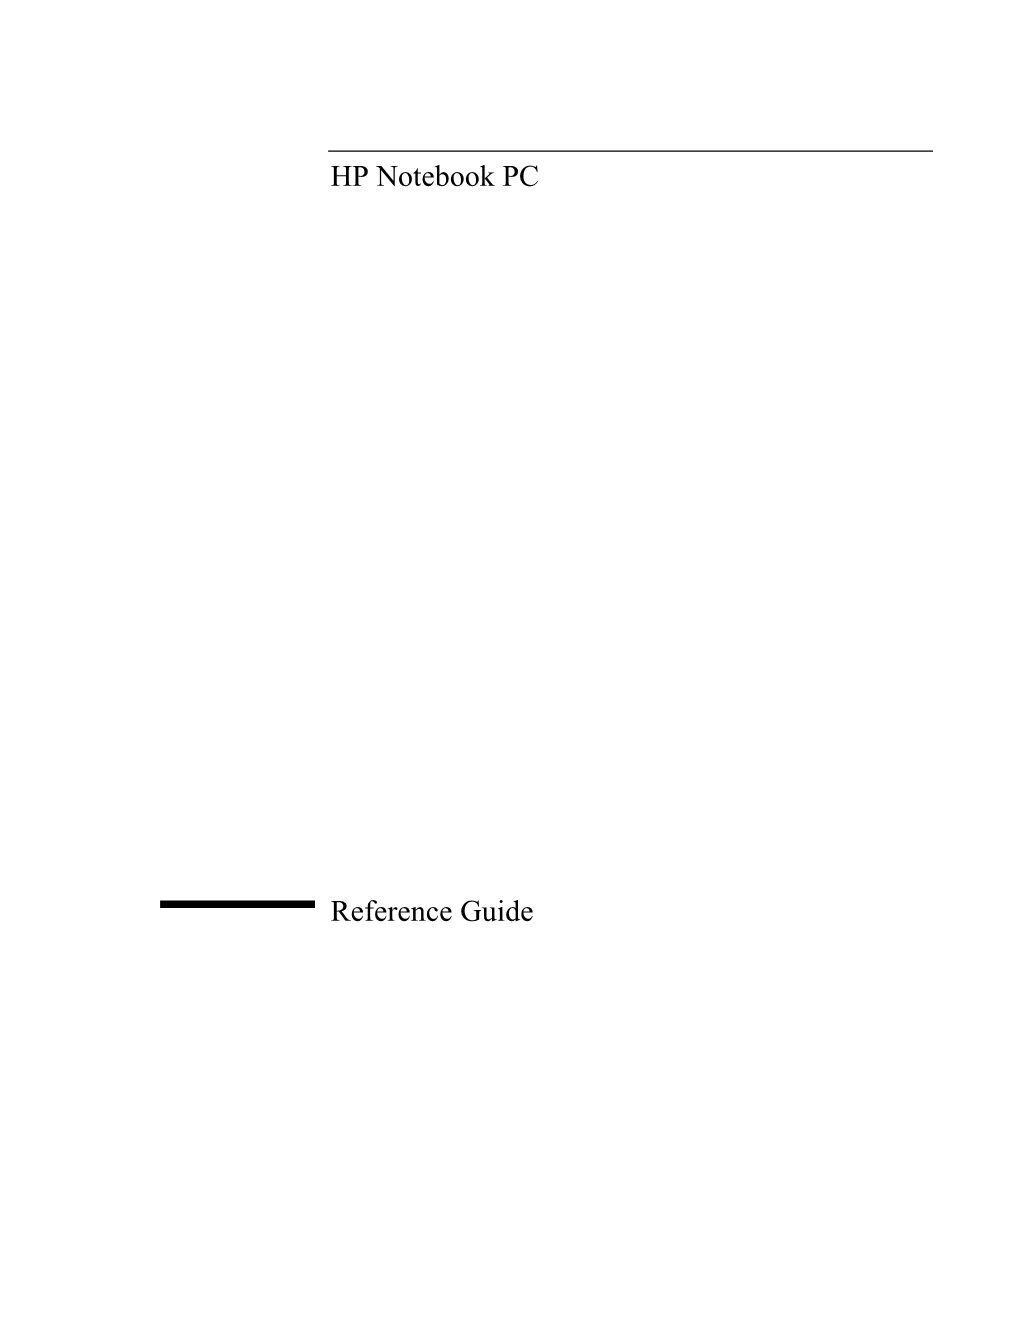 HP Notebook PC Reference Guide